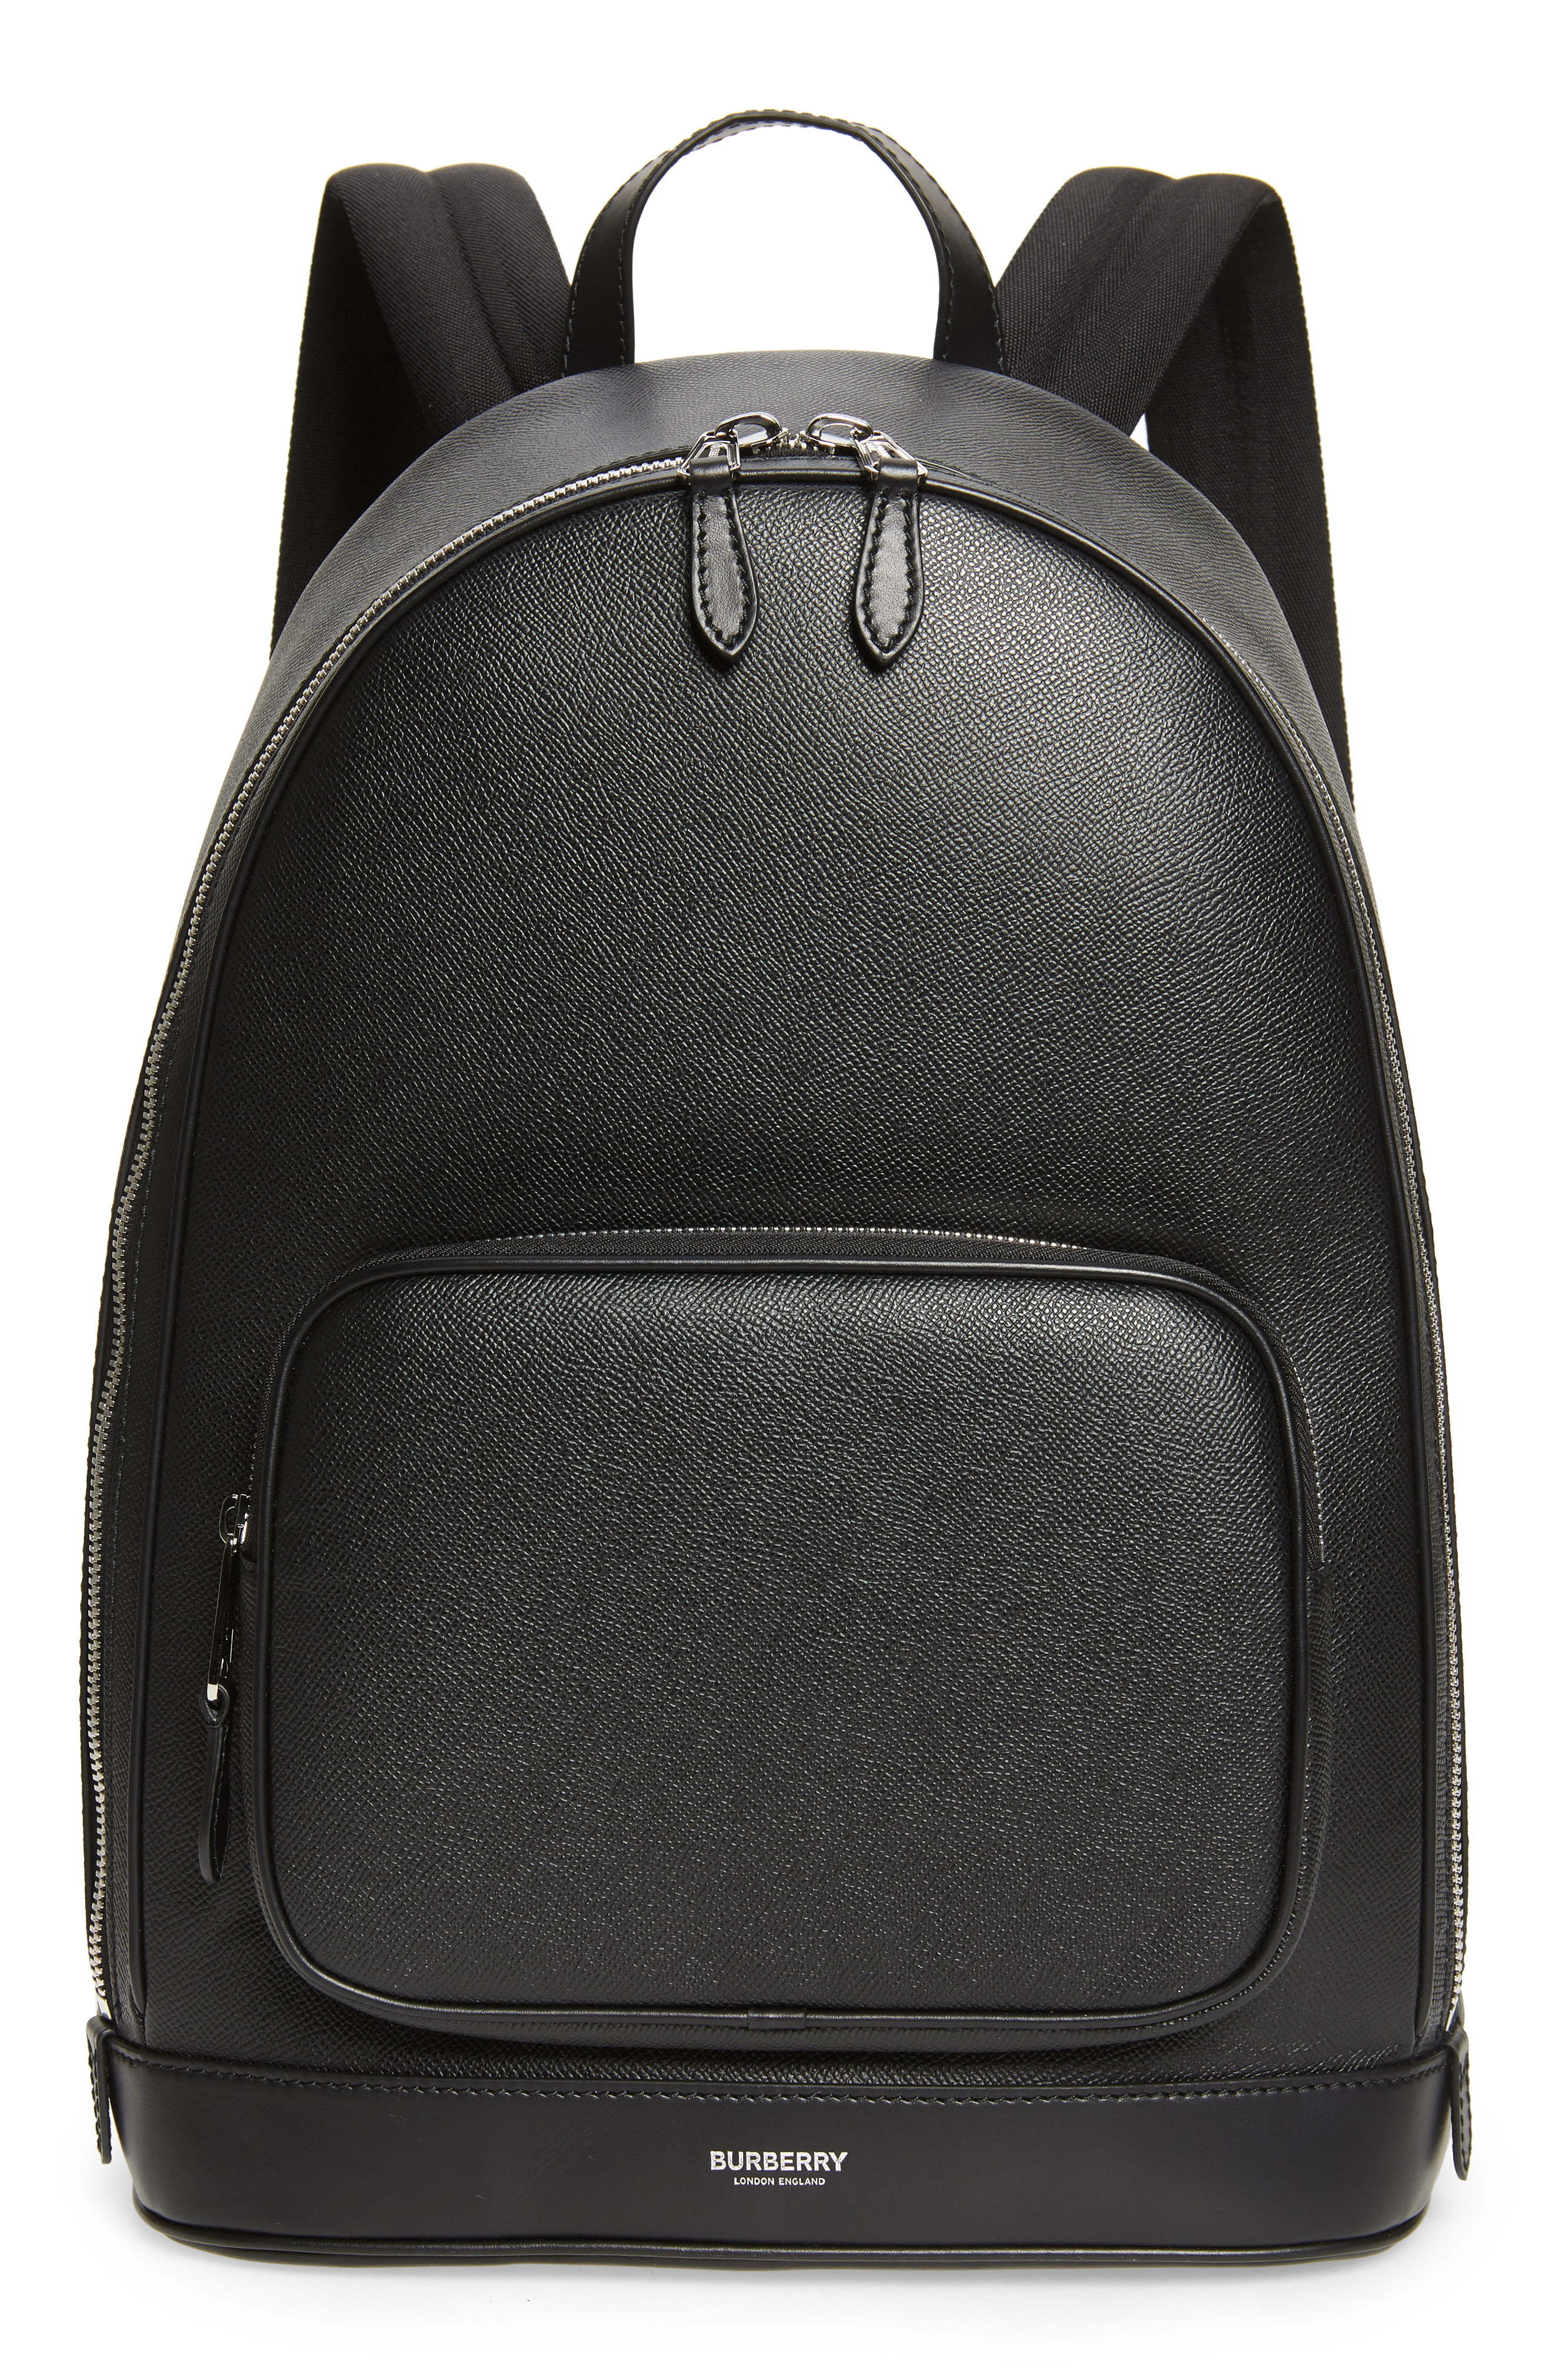 Burberry Rocco Leather Nylon Backpack, $1,450 | Nordstrom | Lookastic